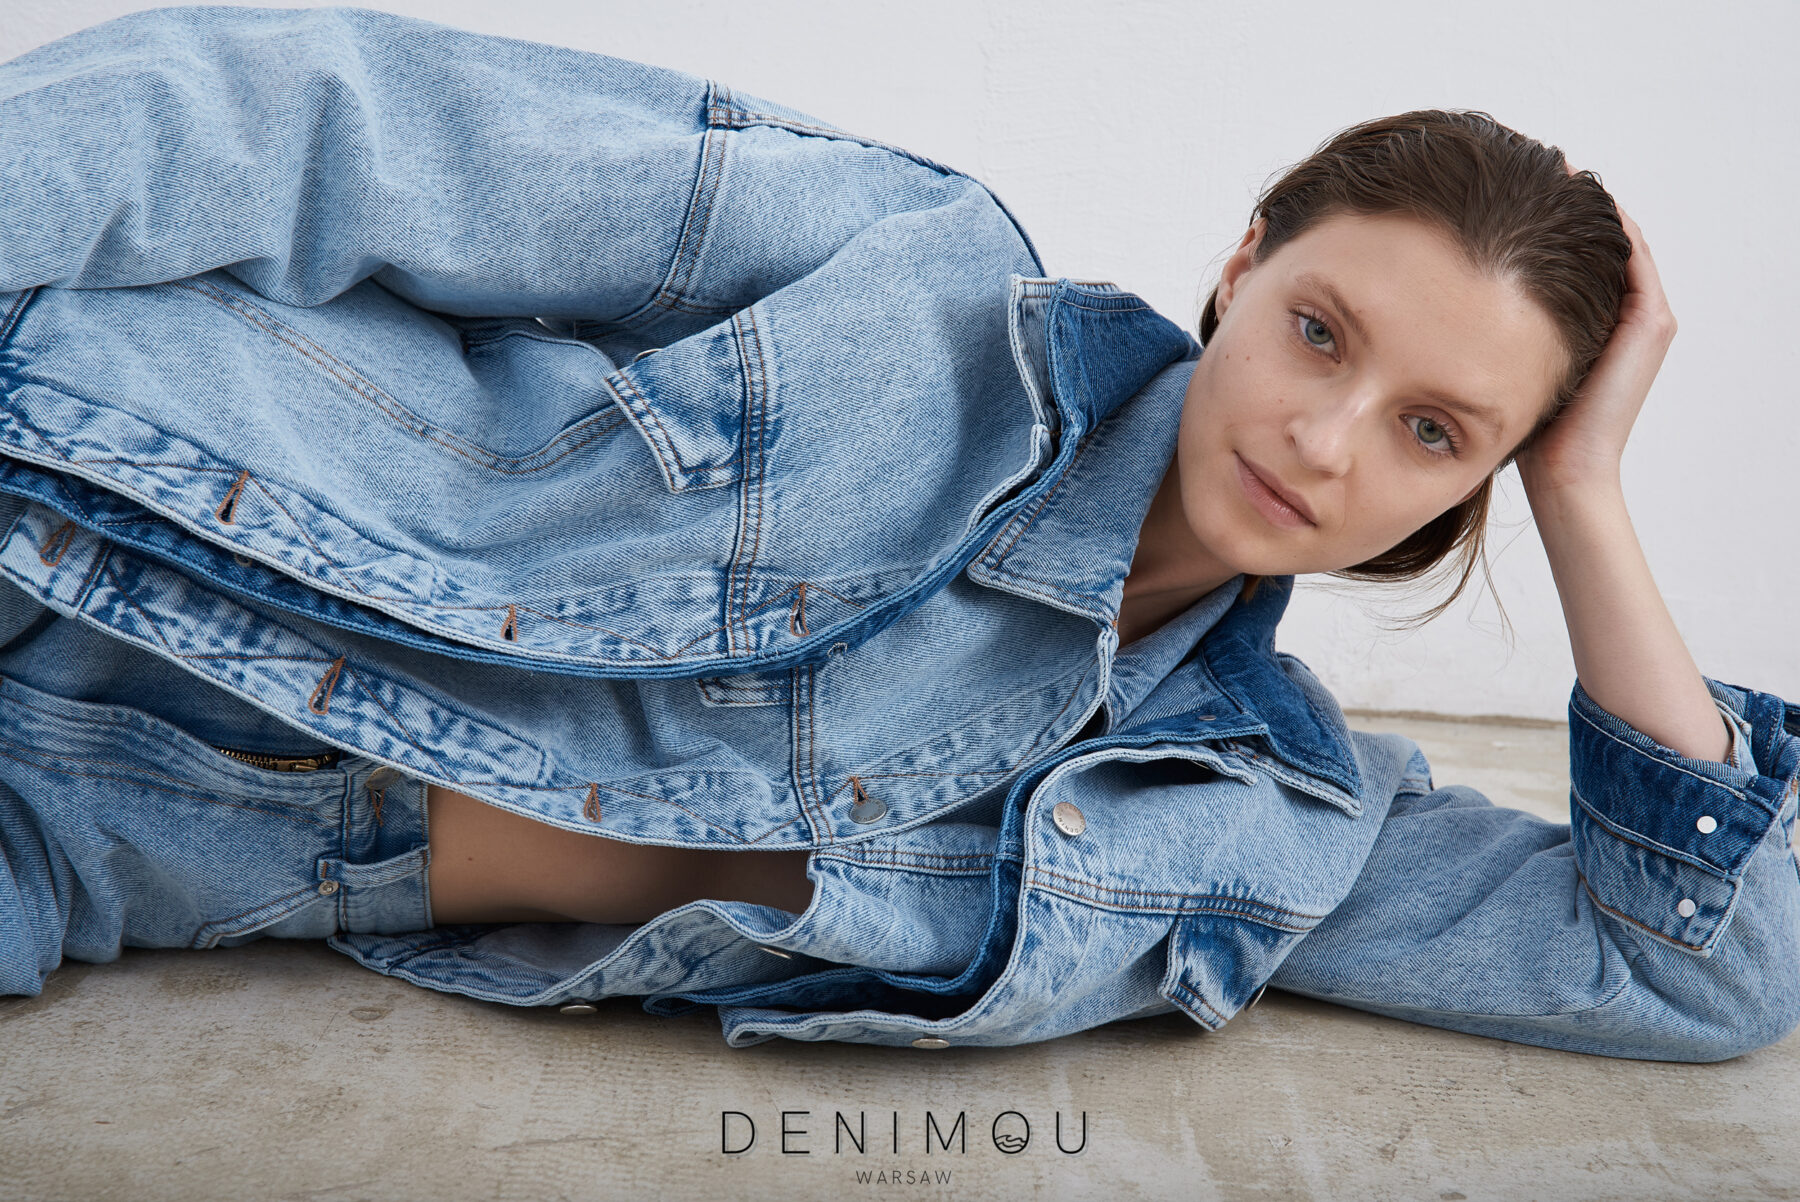 Commercial for Denimou photographed by Ala Wesolowska